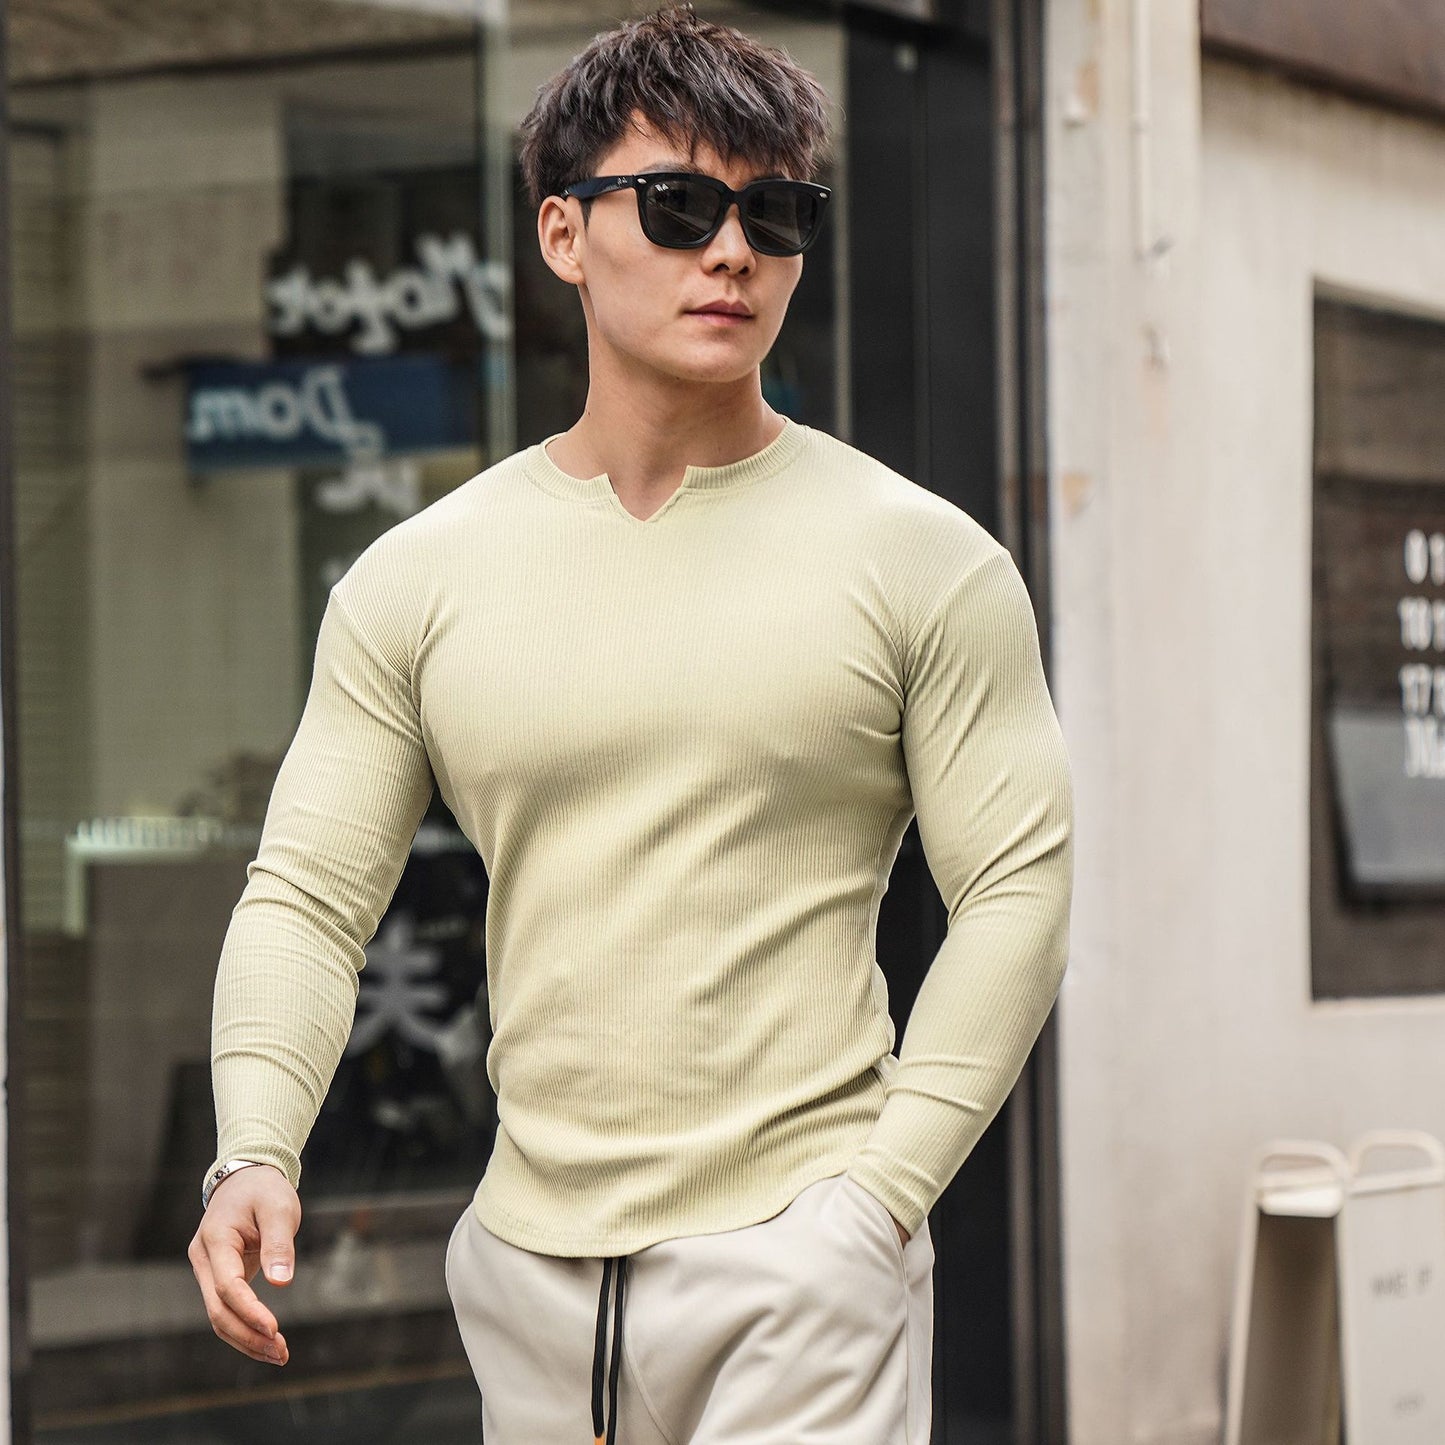 Autumn new men's long sleeve T-shirt arc hem thread fabric comfortable breathable casual clothing outdoor sports